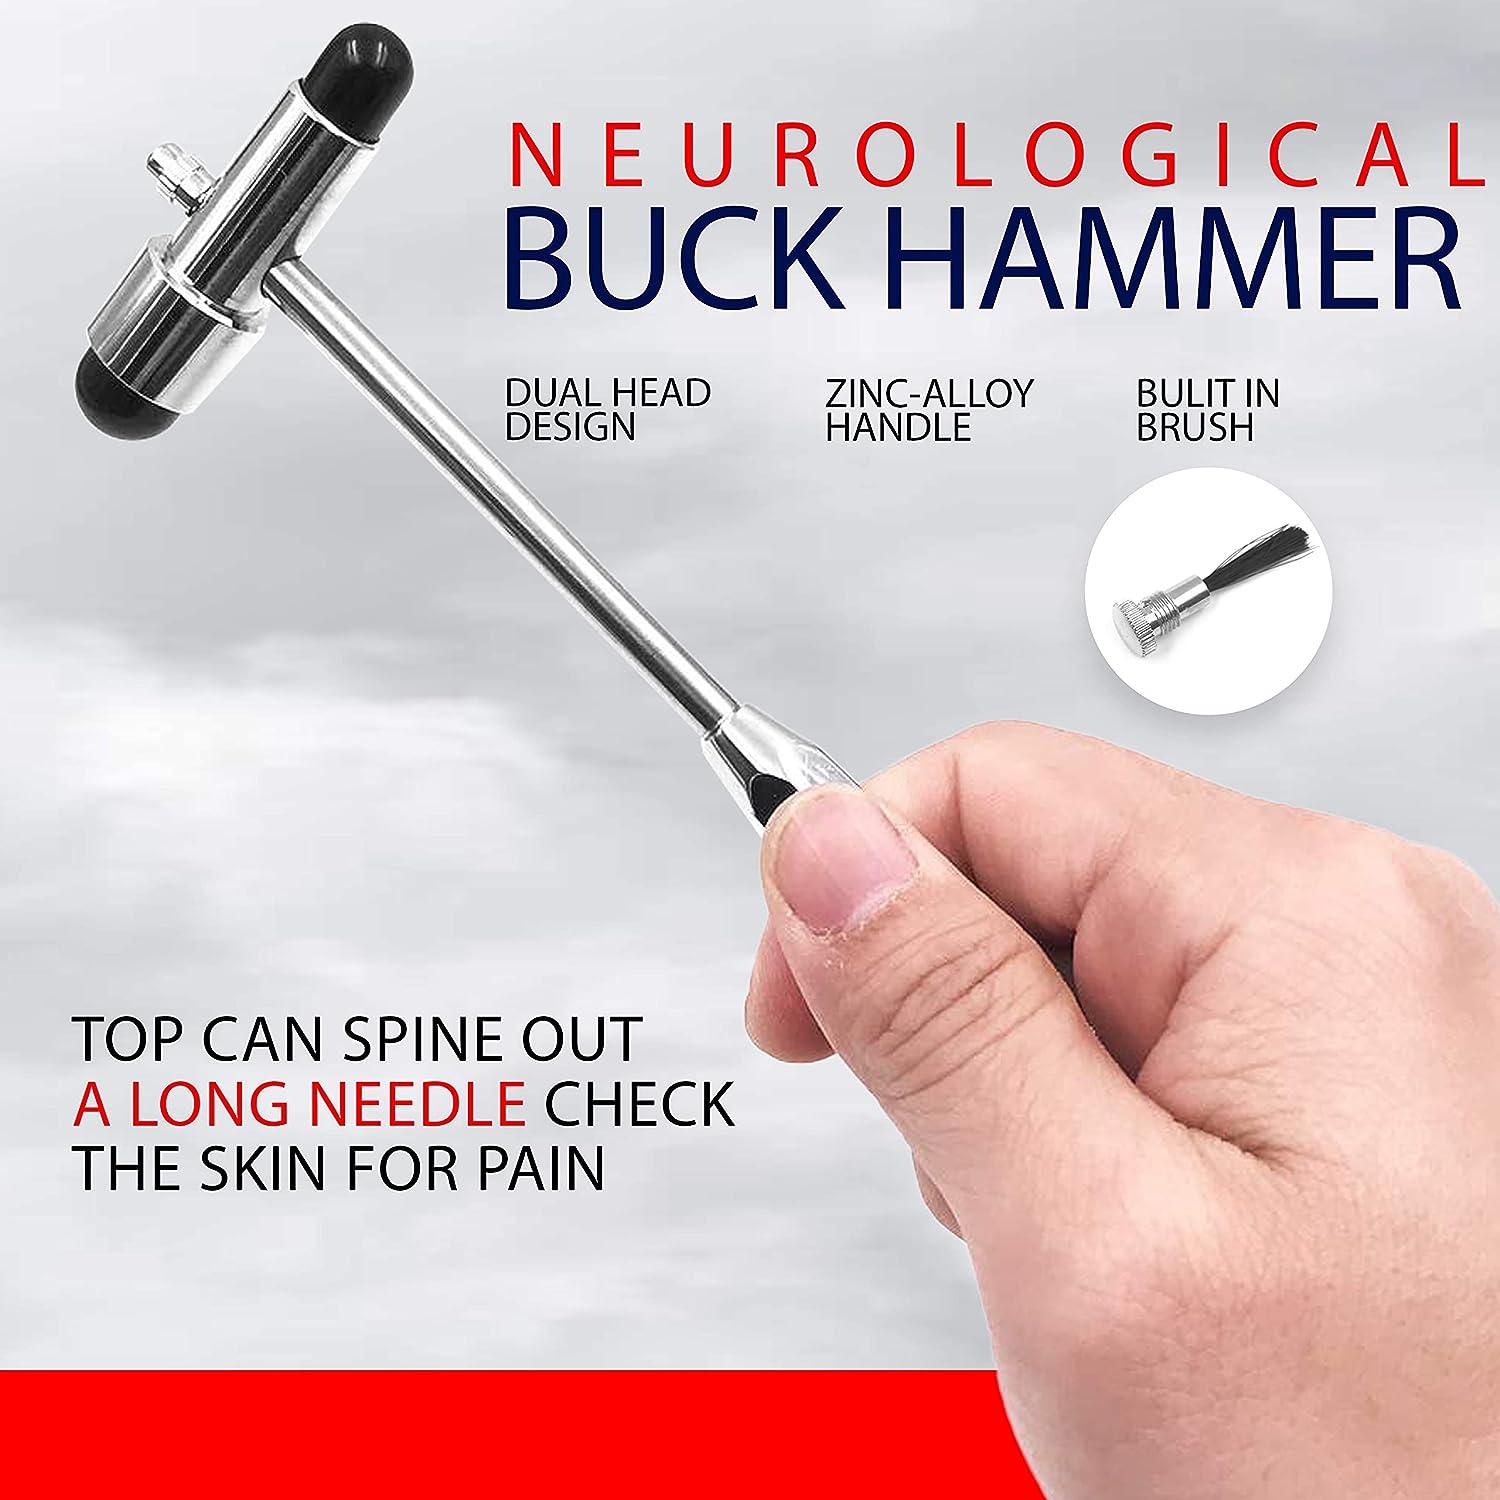 5 in 1 Tuning Fork with Buck Hammer Diagnostic EMS + Nurse Led